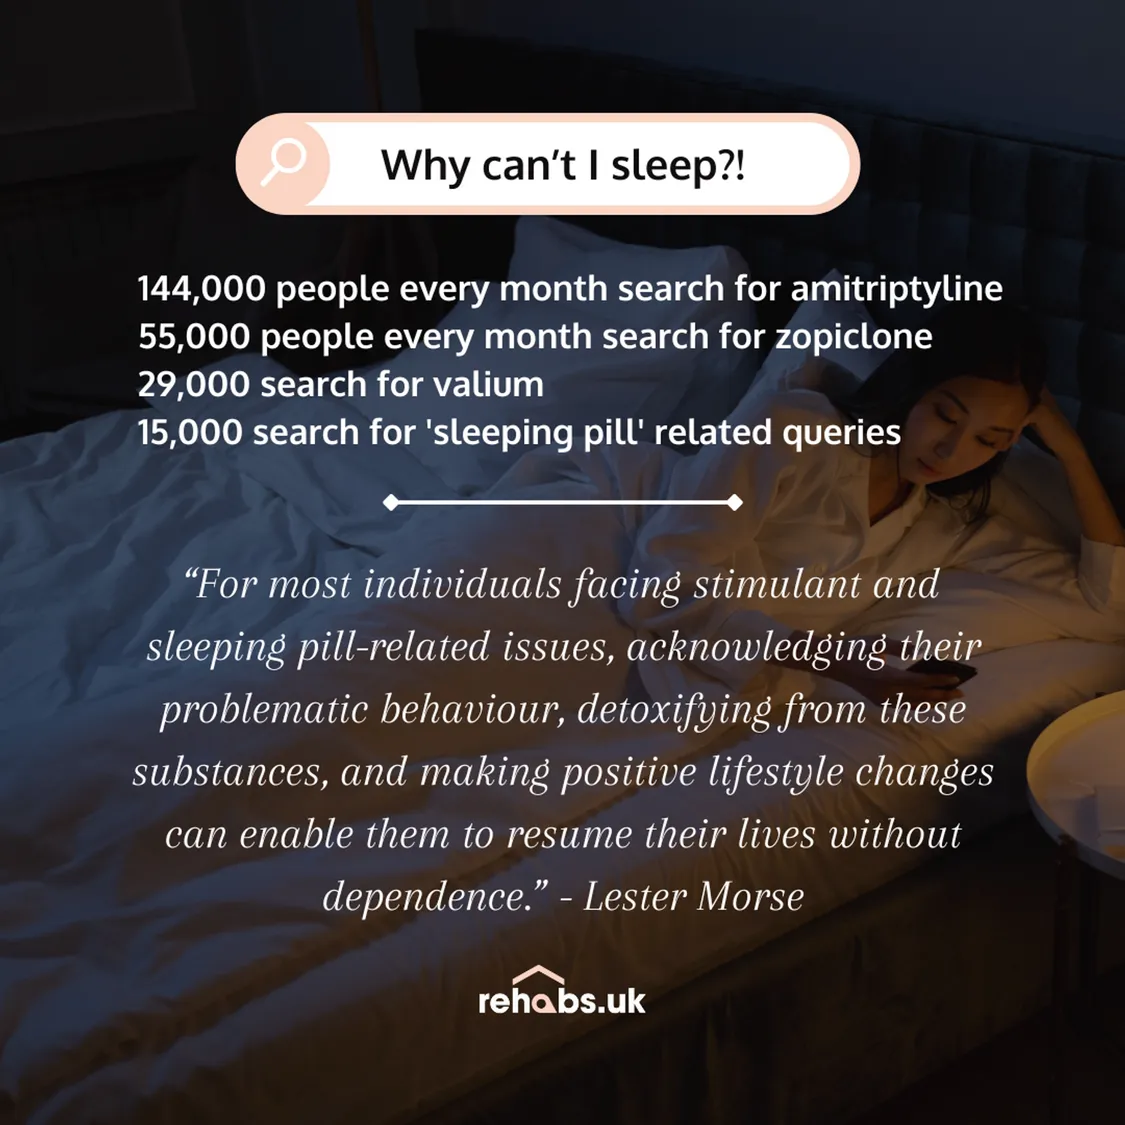 Why Can't We Sleep - Infographic - 144,000 people every month search for amitriptyline 55,000 people every month search for zopiclone 29,000 search for valium 15,000 search for 'sleeping pill' related queries